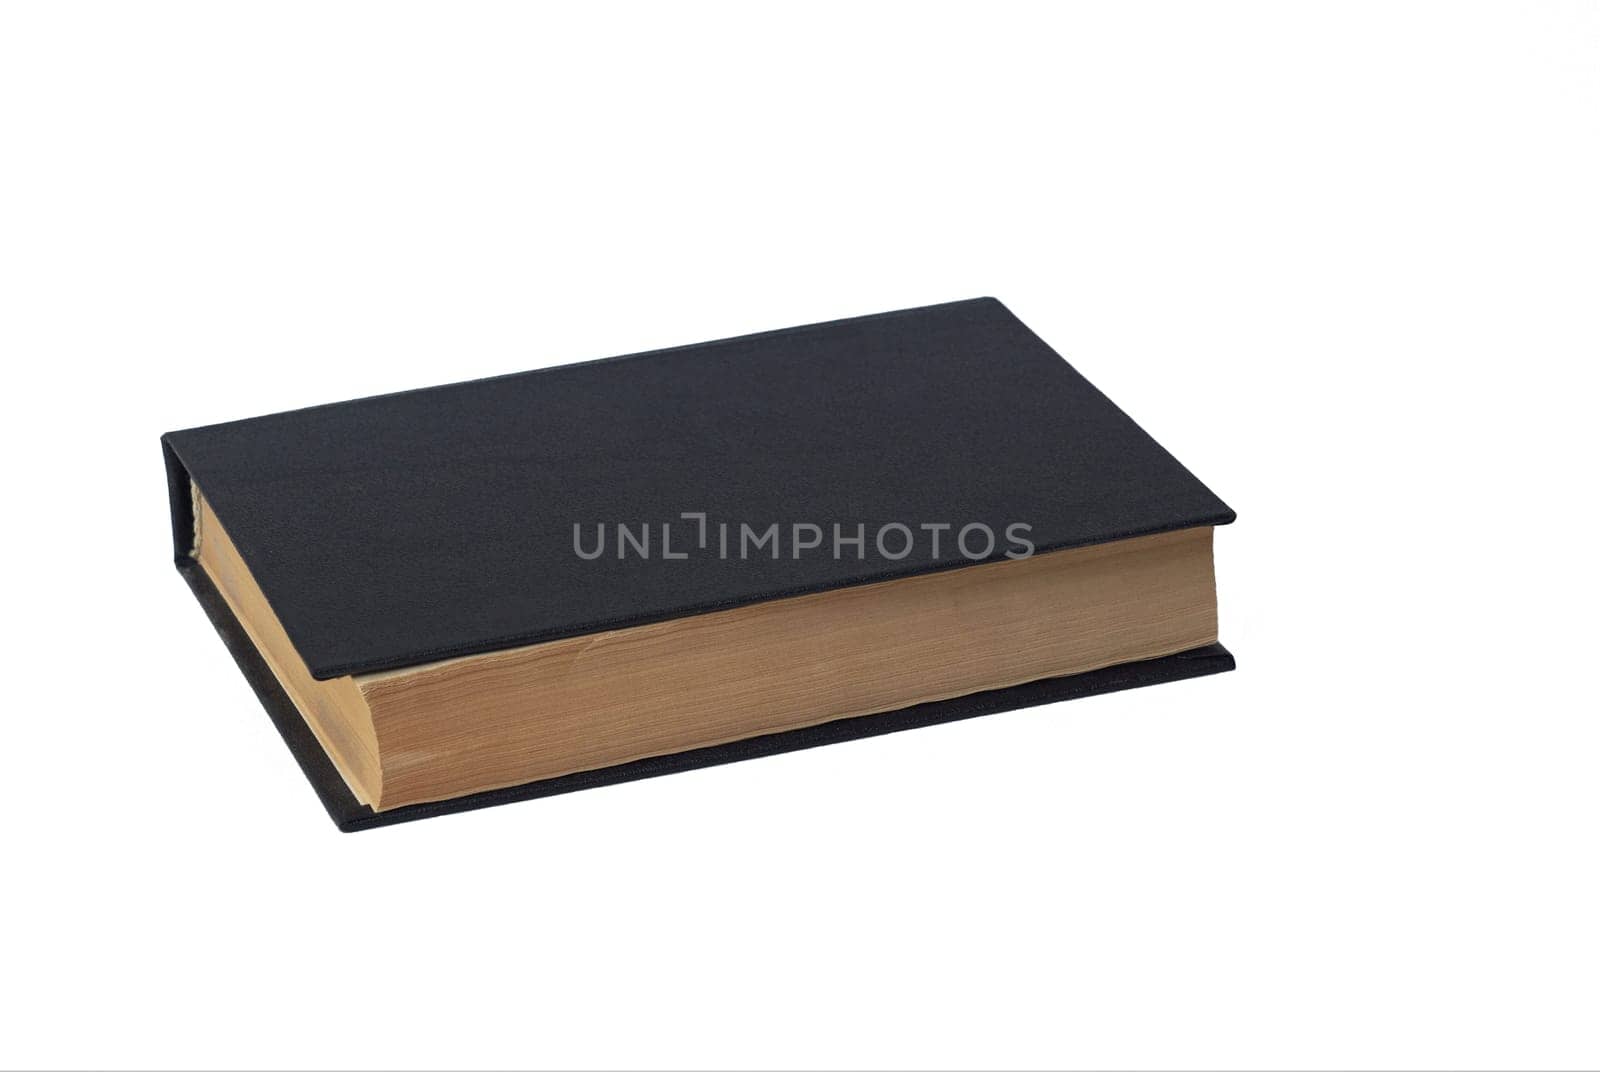 A book in a black hardcover on a white background is an empty book with a black cover on a white background.